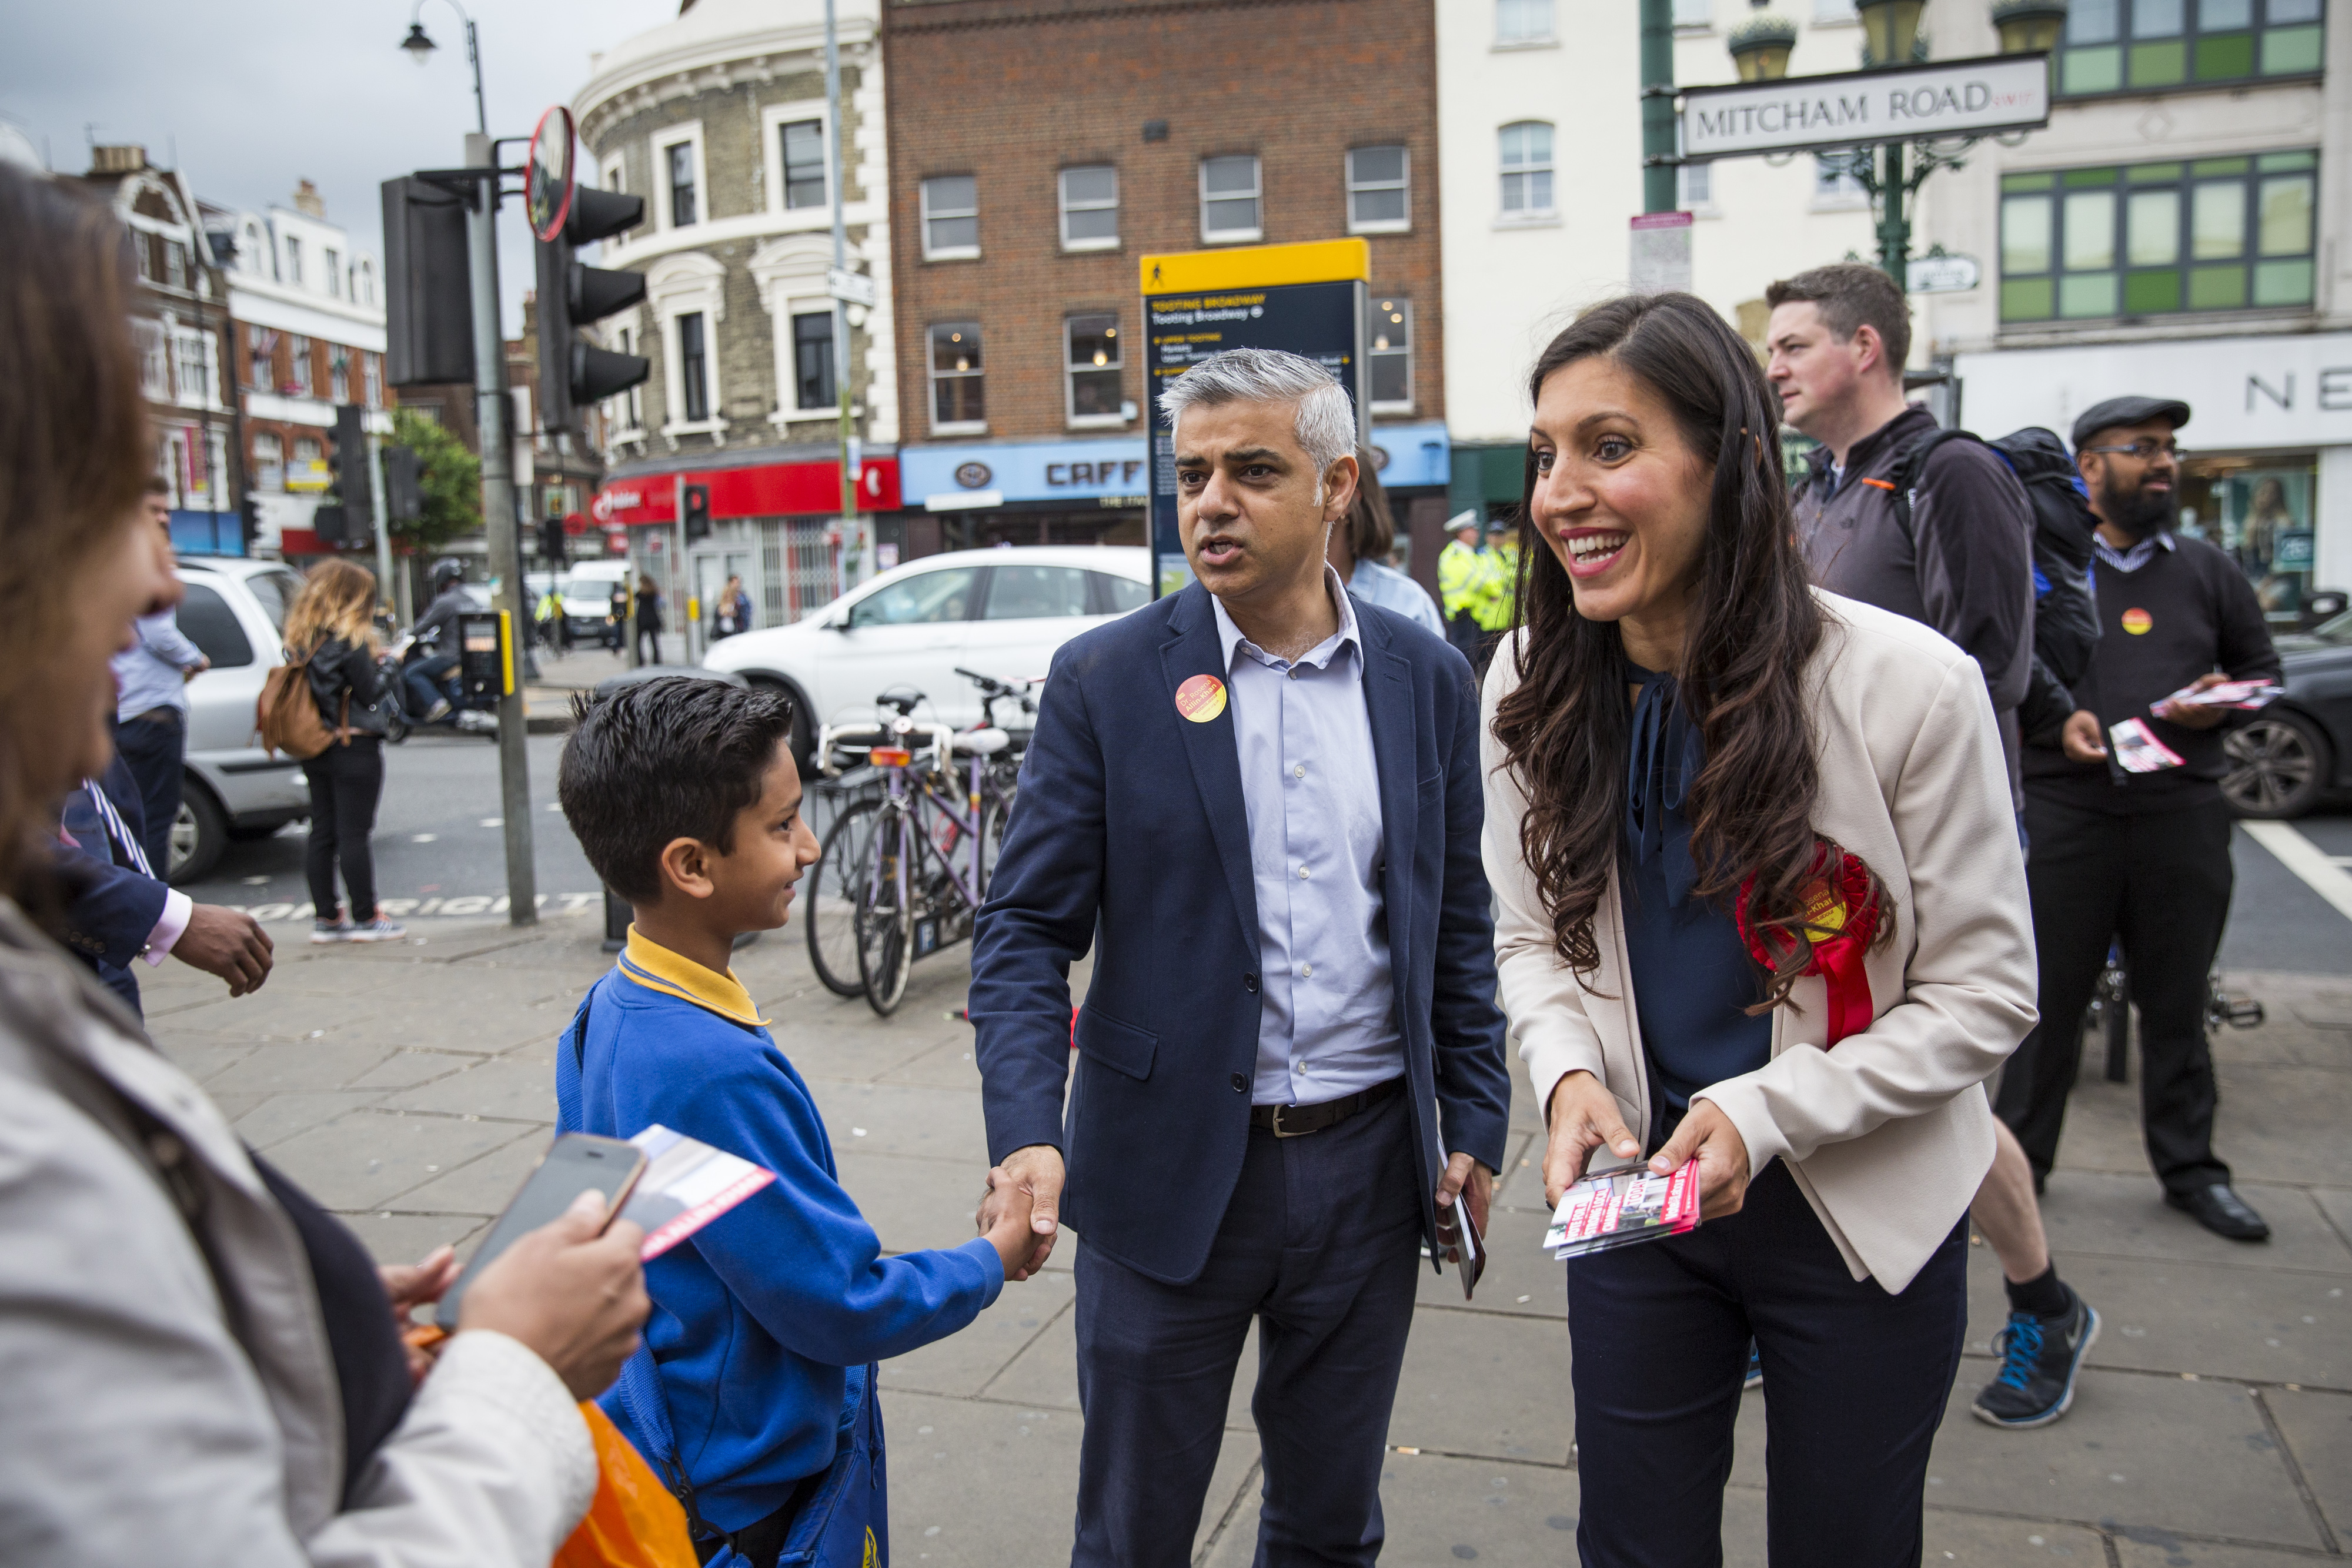 LONDON, ENGLAND - JUNE 16: Labour's MP candidate for Tooting Dr Rosena Allin-Khan (R) campaigns with London Mayor Sadiq Khan (C) outside Tooting Broadway Station on June 16, 2016 in London, England. Voters in Tooting, south London decide on a new MP in a by-election today following the seat vacancy left from Sadiq Khan's mayoral victory last month. (Photo by Jack Taylor/Getty Images)